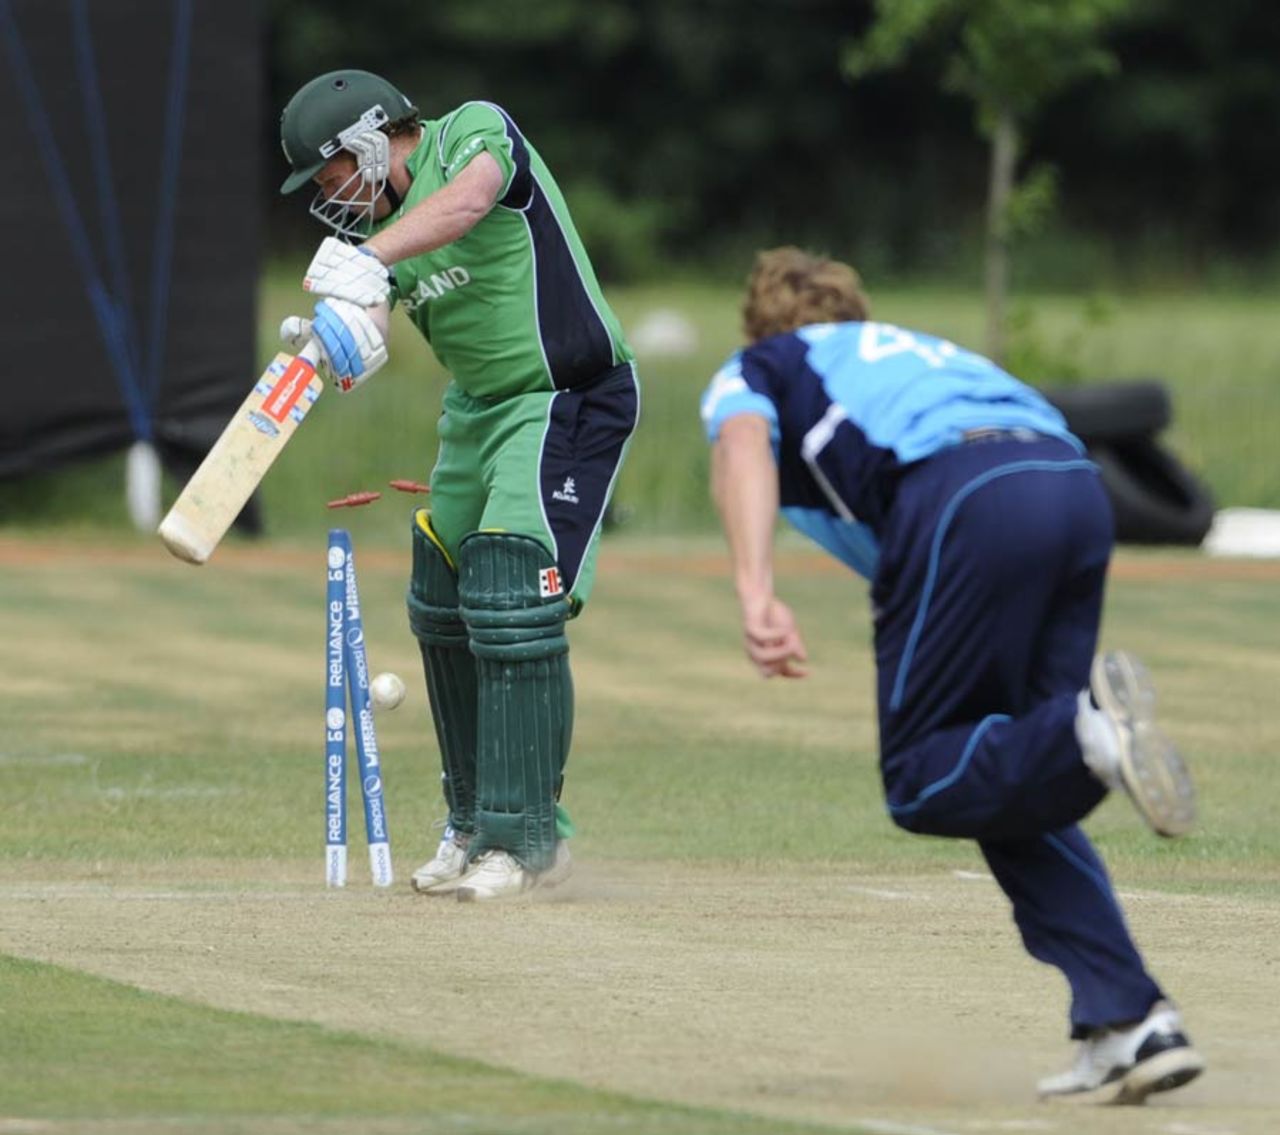 Ireland's Paul Stirling is bowled for 37, Ireland v Scotland, ICC WCL Division 1, Voorburg, July 5, 2010